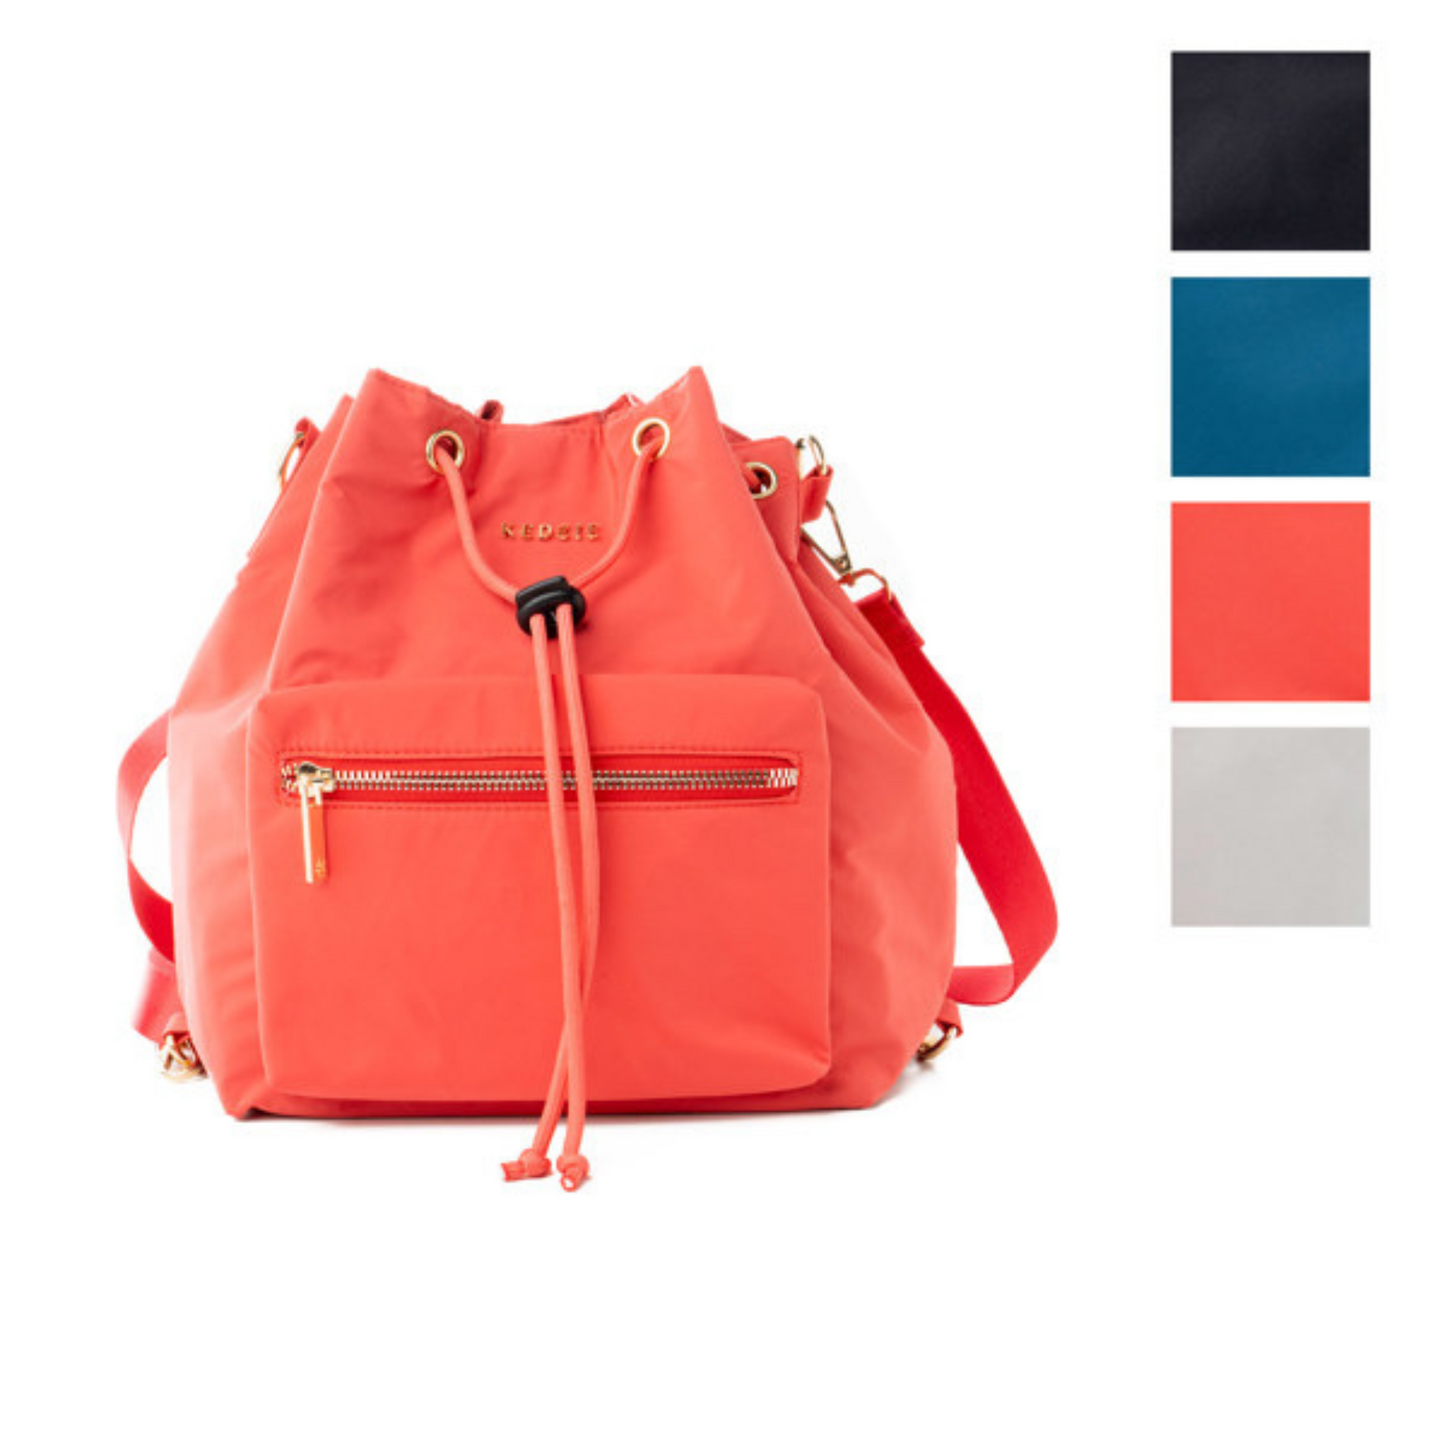 The Aries Convertible Bucket Bag offers versatility and style. With easy to clean fabric and a zippered front pocket, it's perfect for everyday use. Use the 3 interchangeable straps to wear it as a sling, crossbody, or backpack. The secure drawstring closure and smooth-glide zippers make it practical and fashionable. Available in 4 trendy colors.